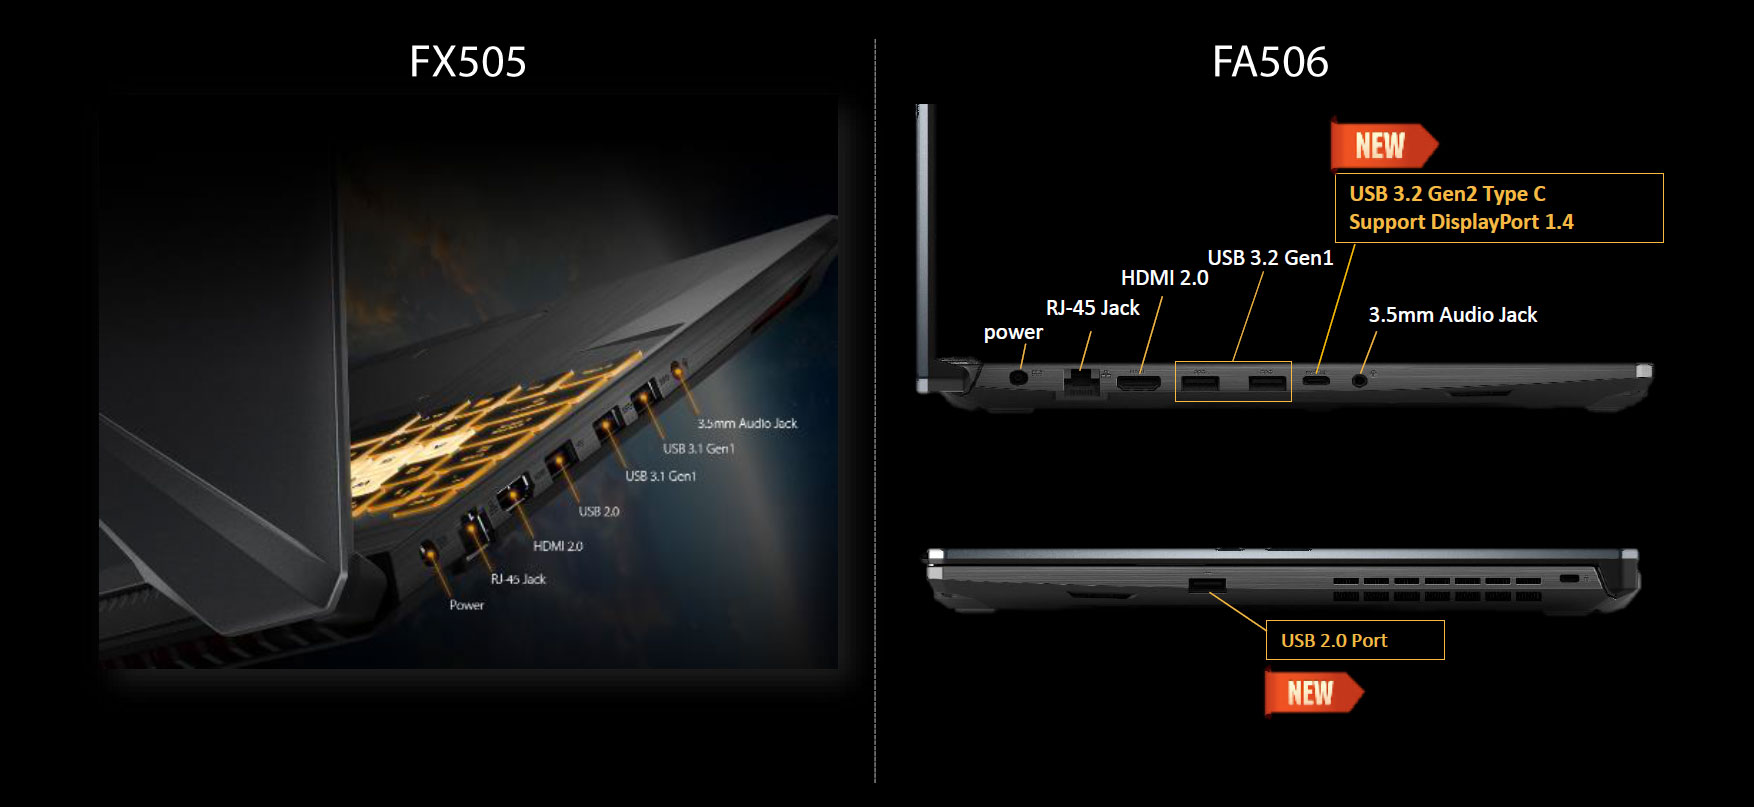 Asus TUF Gaming A15 FA506 - redesigned ports